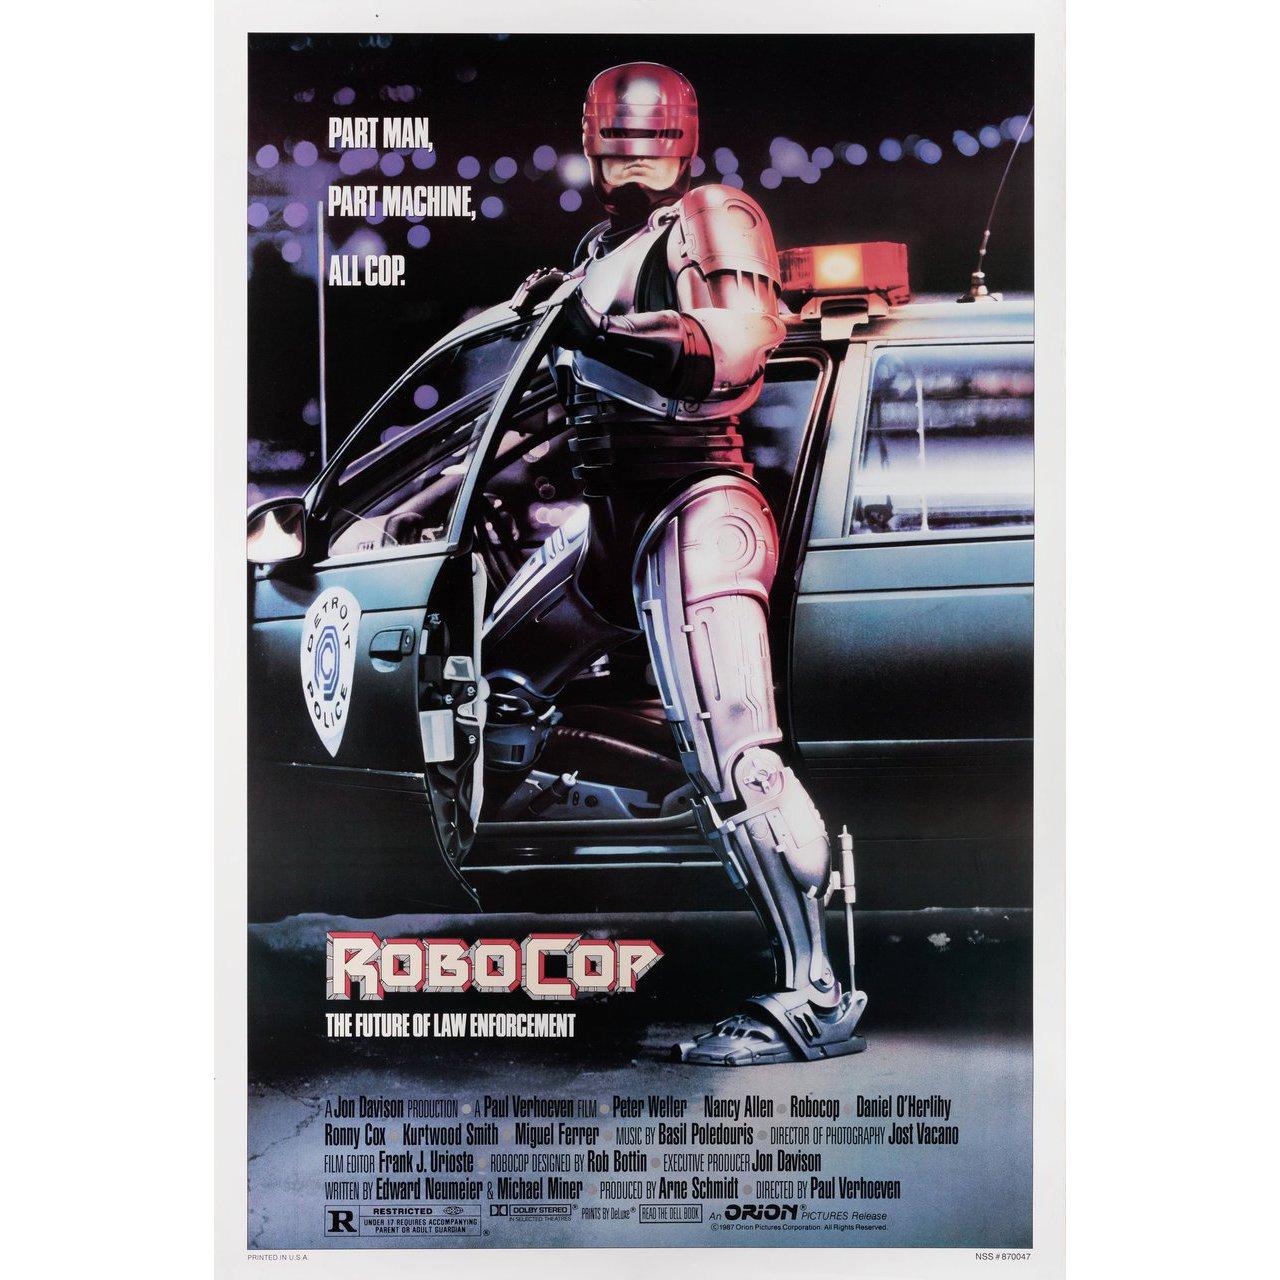 Original 1987 U.S. one sheet poster by Mike Bryan for the film RoboCop directed by Paul Verhoeven with Peter Weller / Nancy Allen / Dan O'Herlihy / Ronny Cox. Very Good-Fine condition, rolled. Please note: the size is stated in inches and the actual